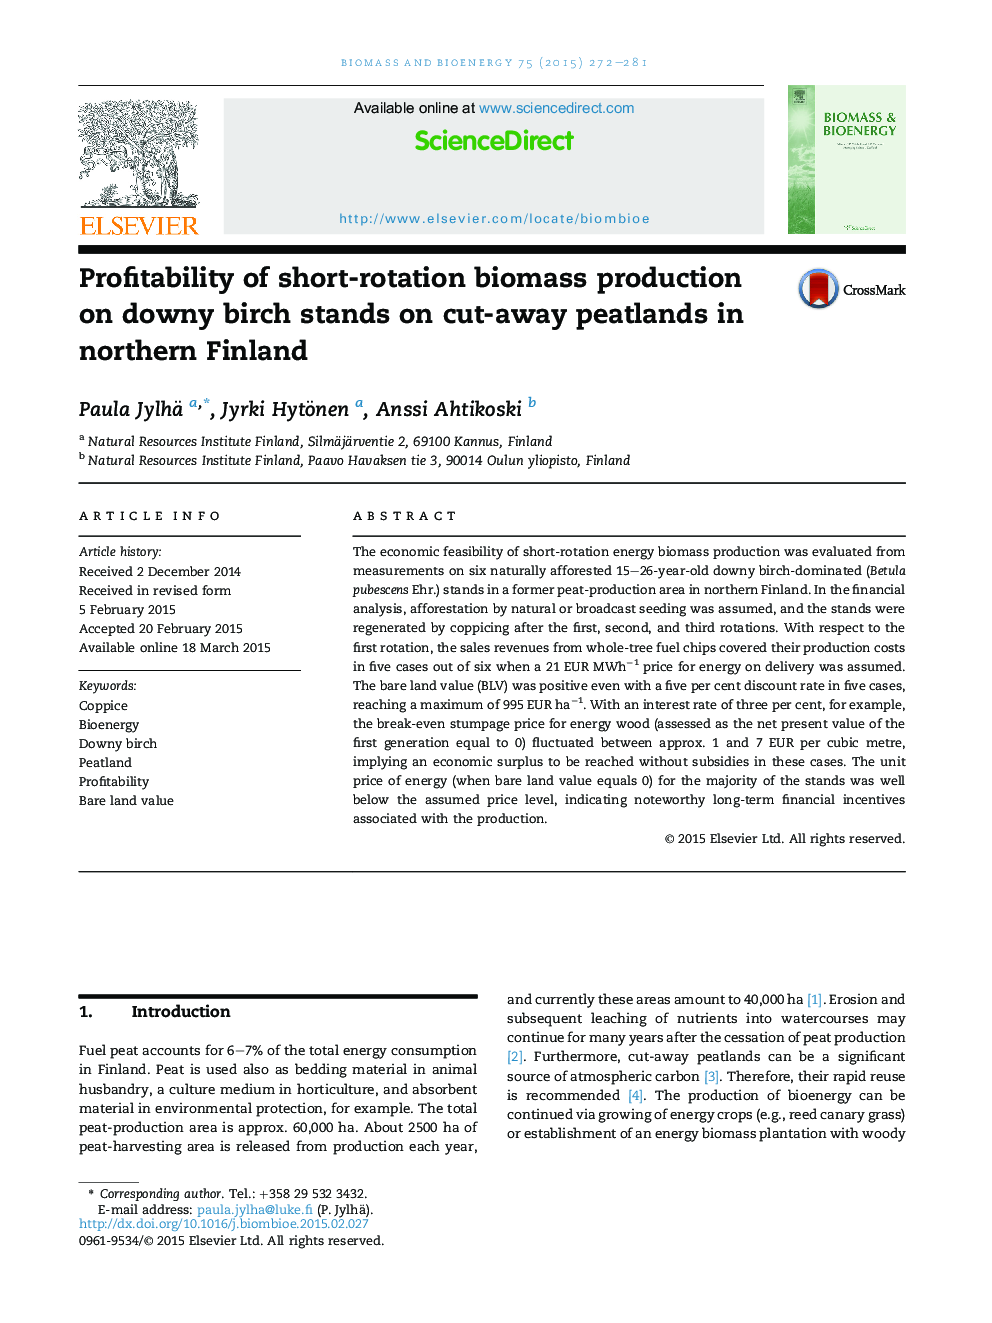 Profitability of short-rotation biomass production on downy birch stands on cut-away peatlands in northern Finland